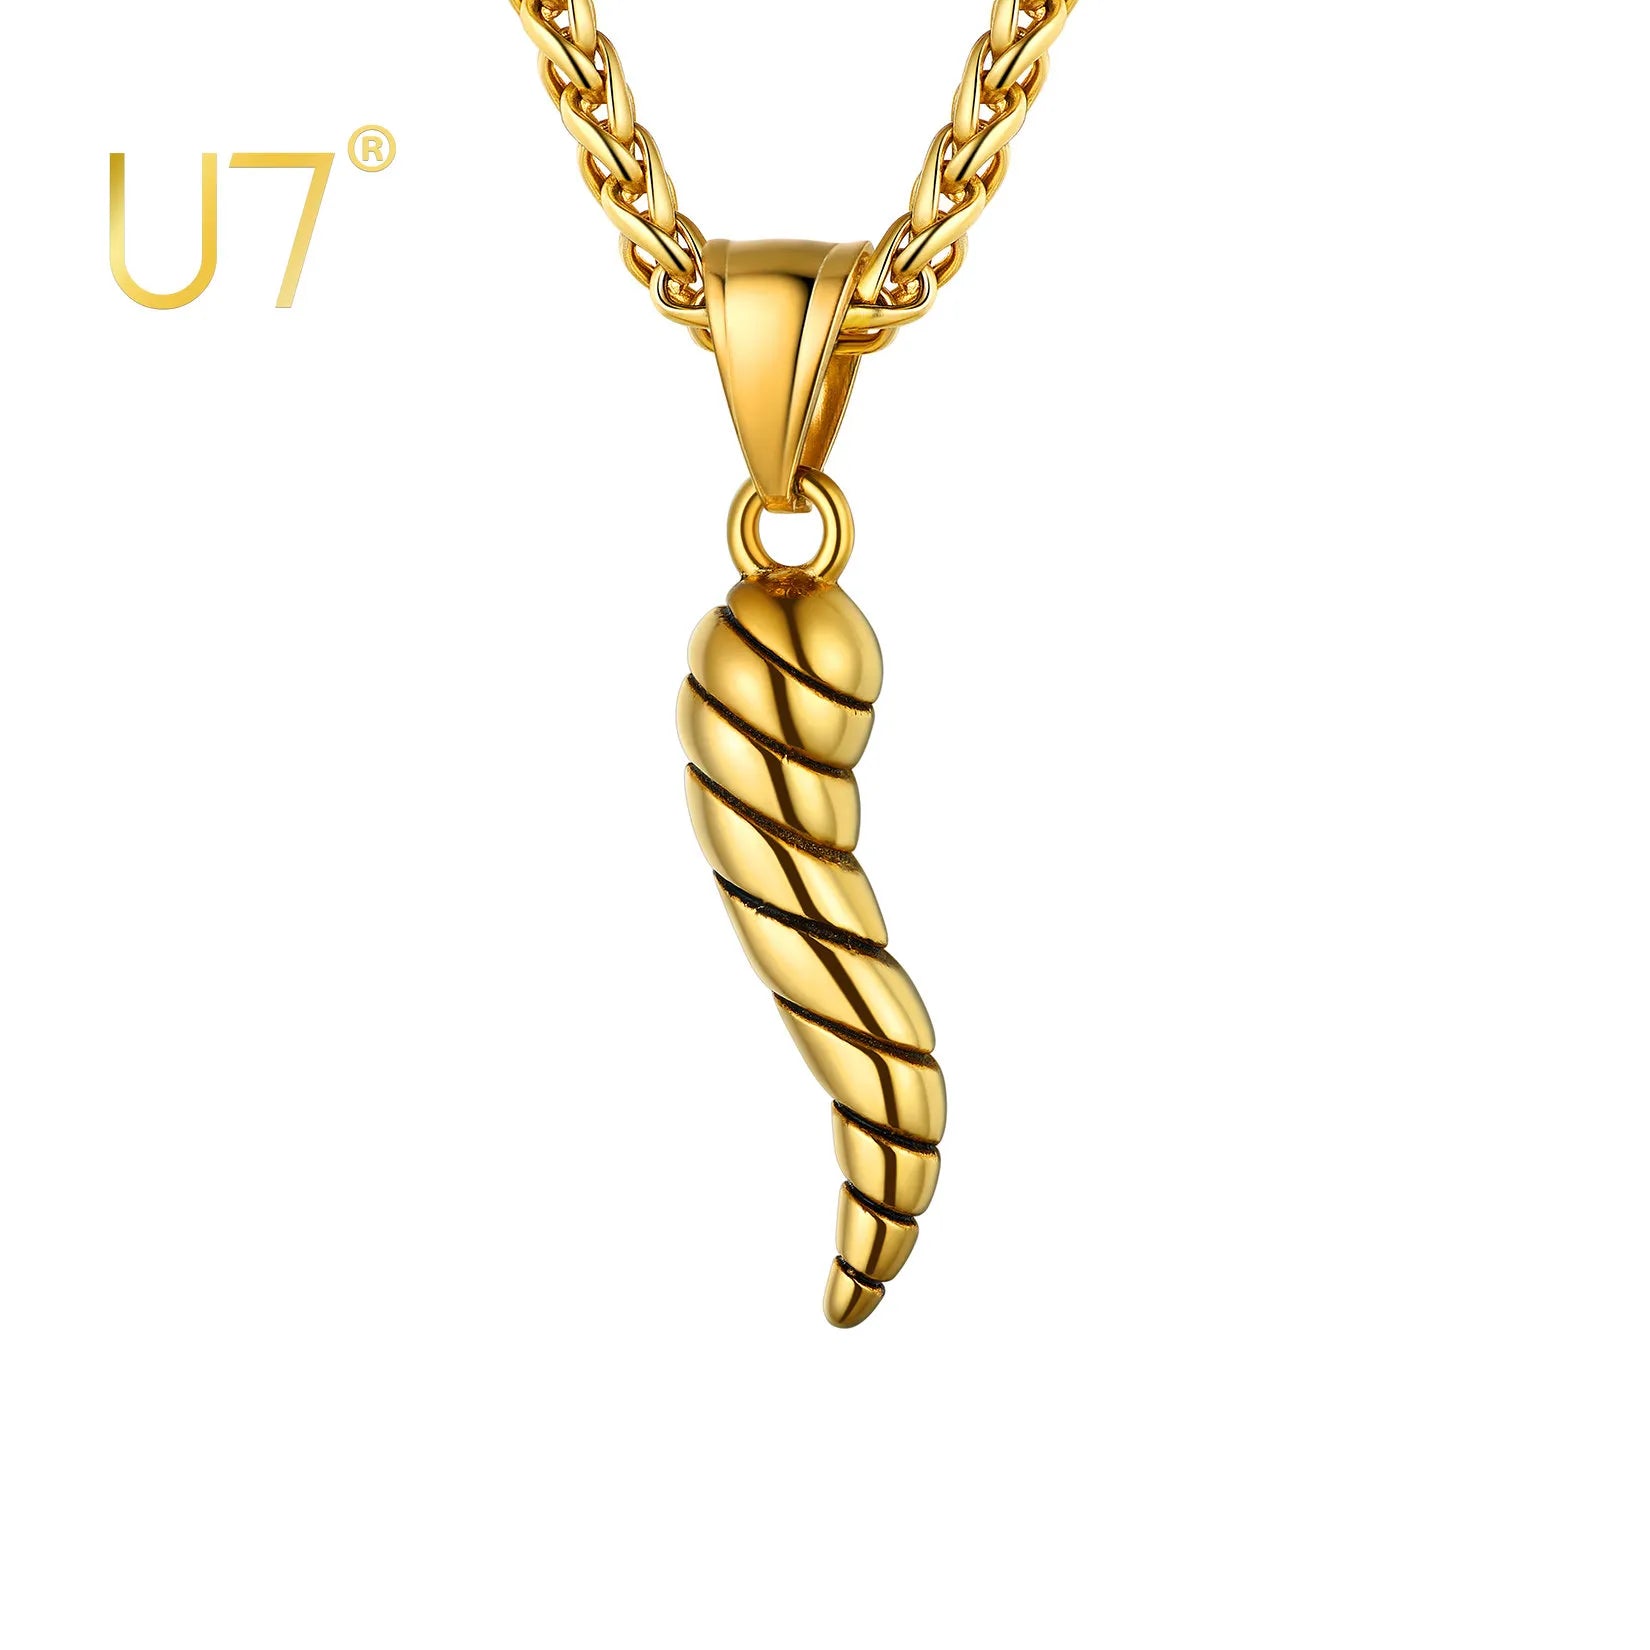 U7 Italian Horn Necklace Amulet Protection Charm Pepper Pendant Chili Cornicello for Men Women - Charlie Dolly